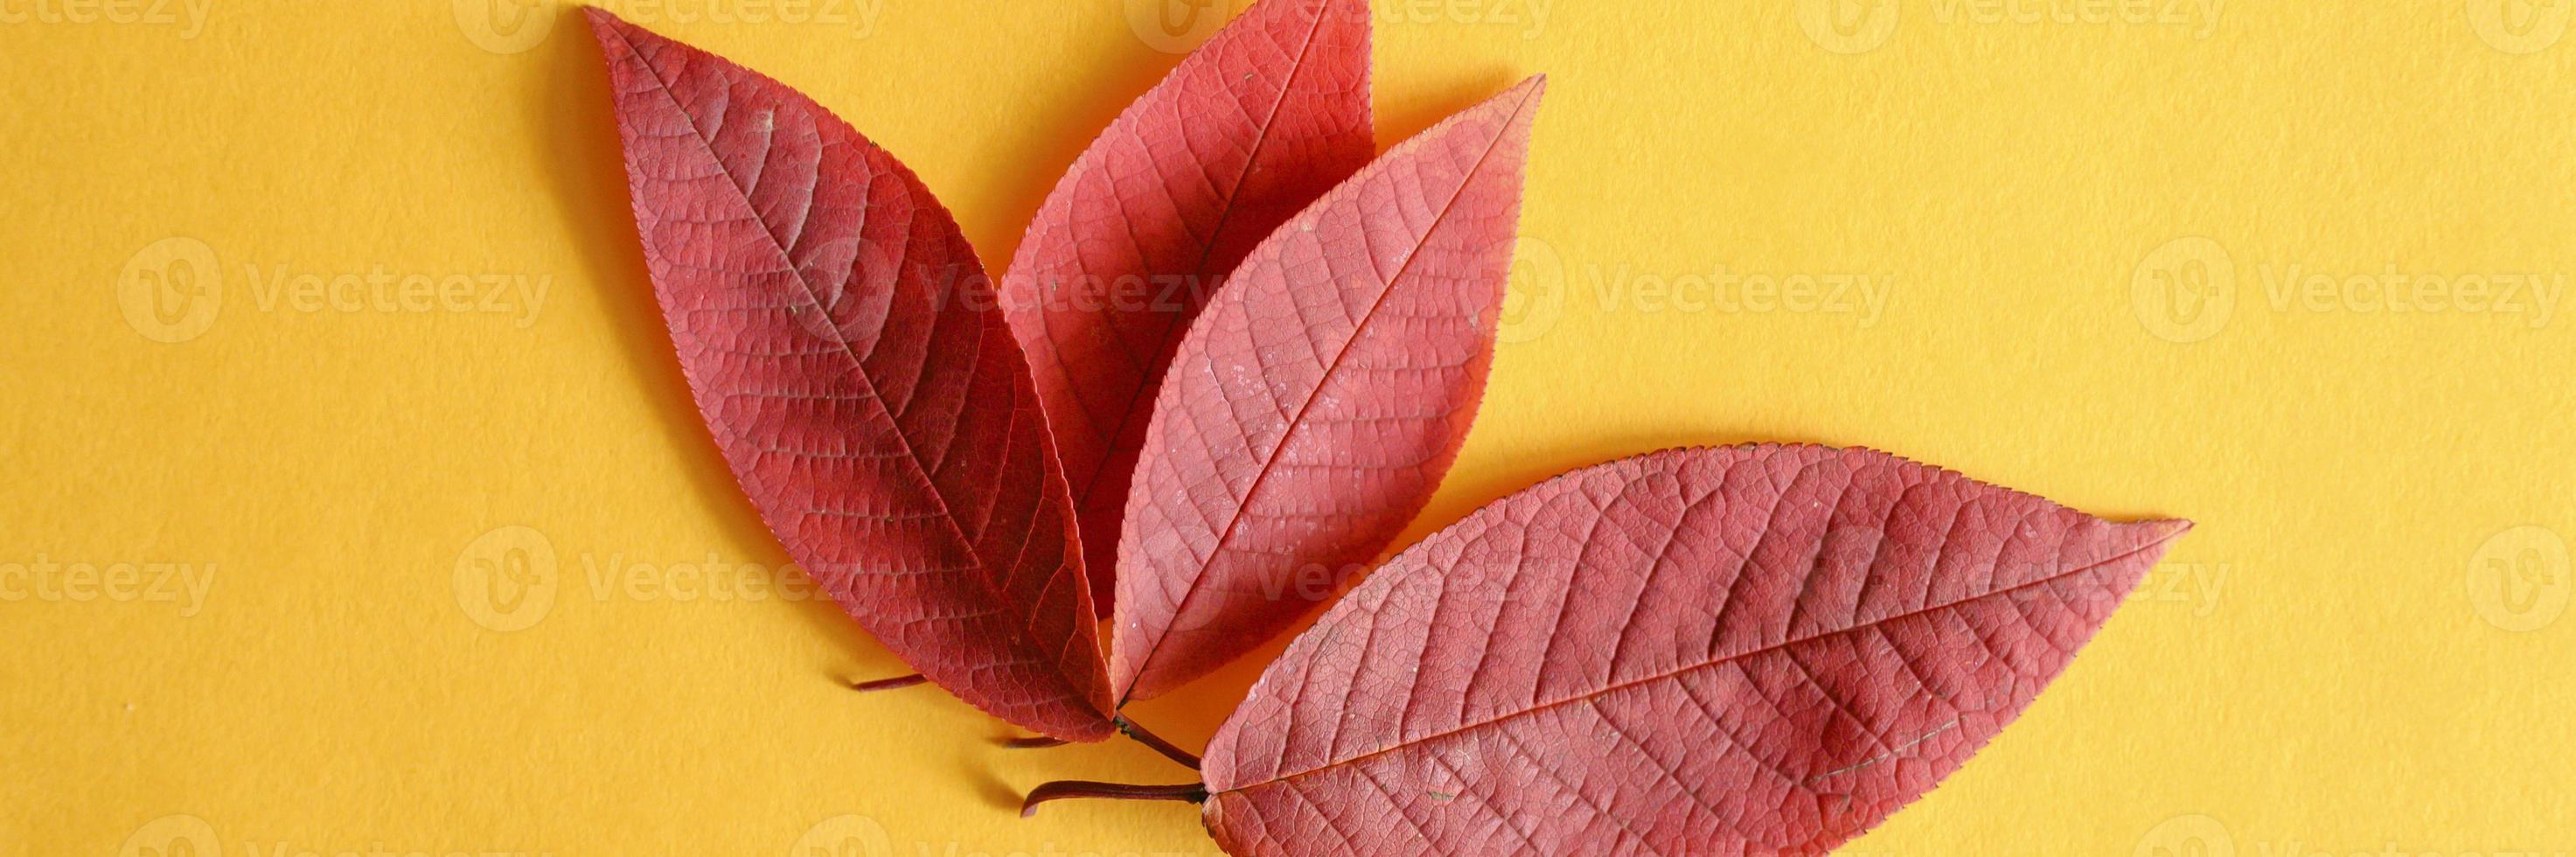 Several red fallen autumn cherry leaves on a yellow paper background flat lay photo